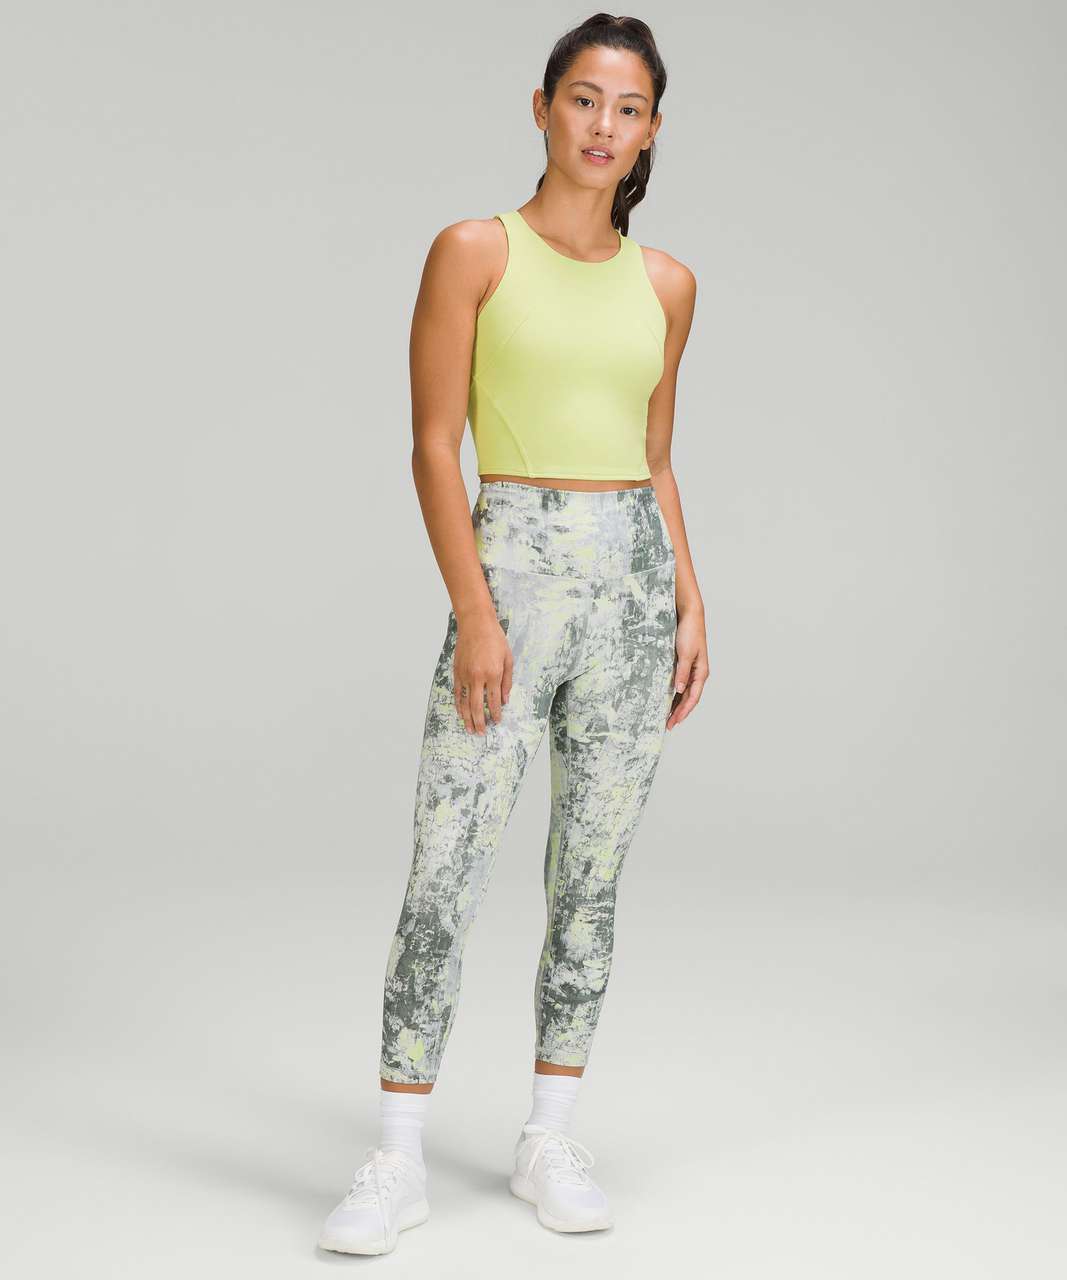 Lululemon Wunder Train High-Rise Crop with Pockets 23" - Cinder Grain Smoked Spruce Multi